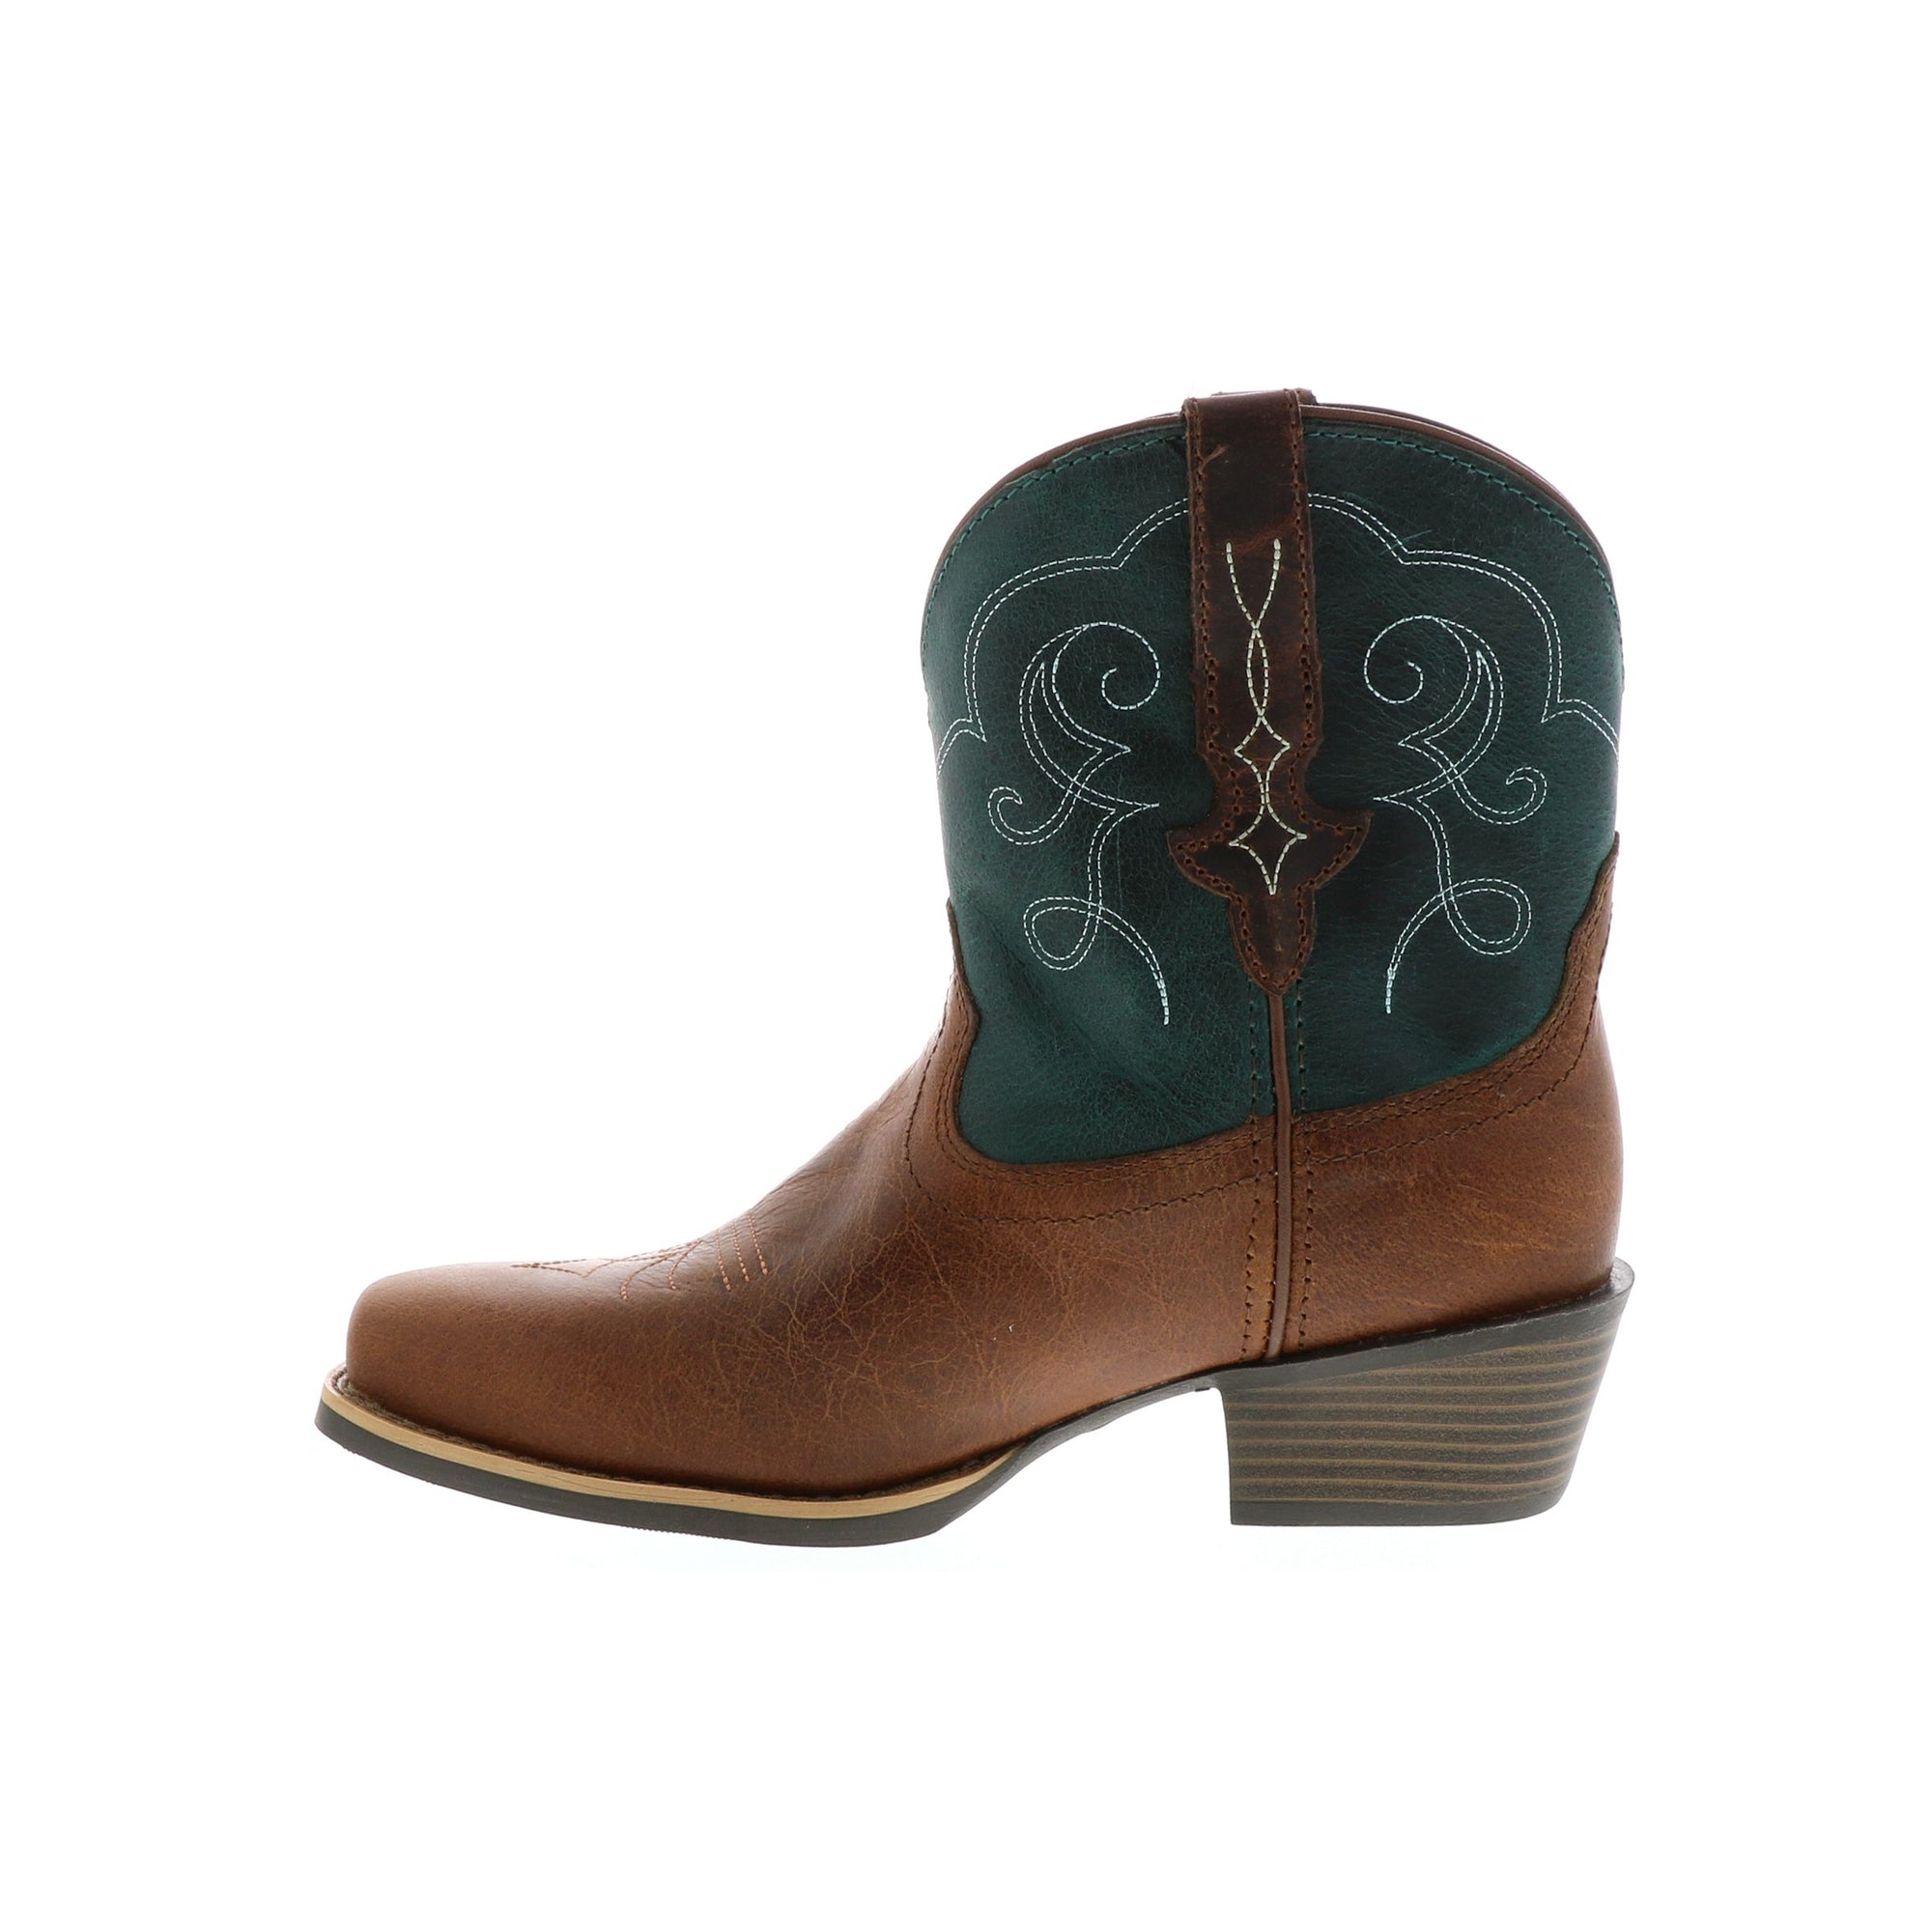 justin boots teal